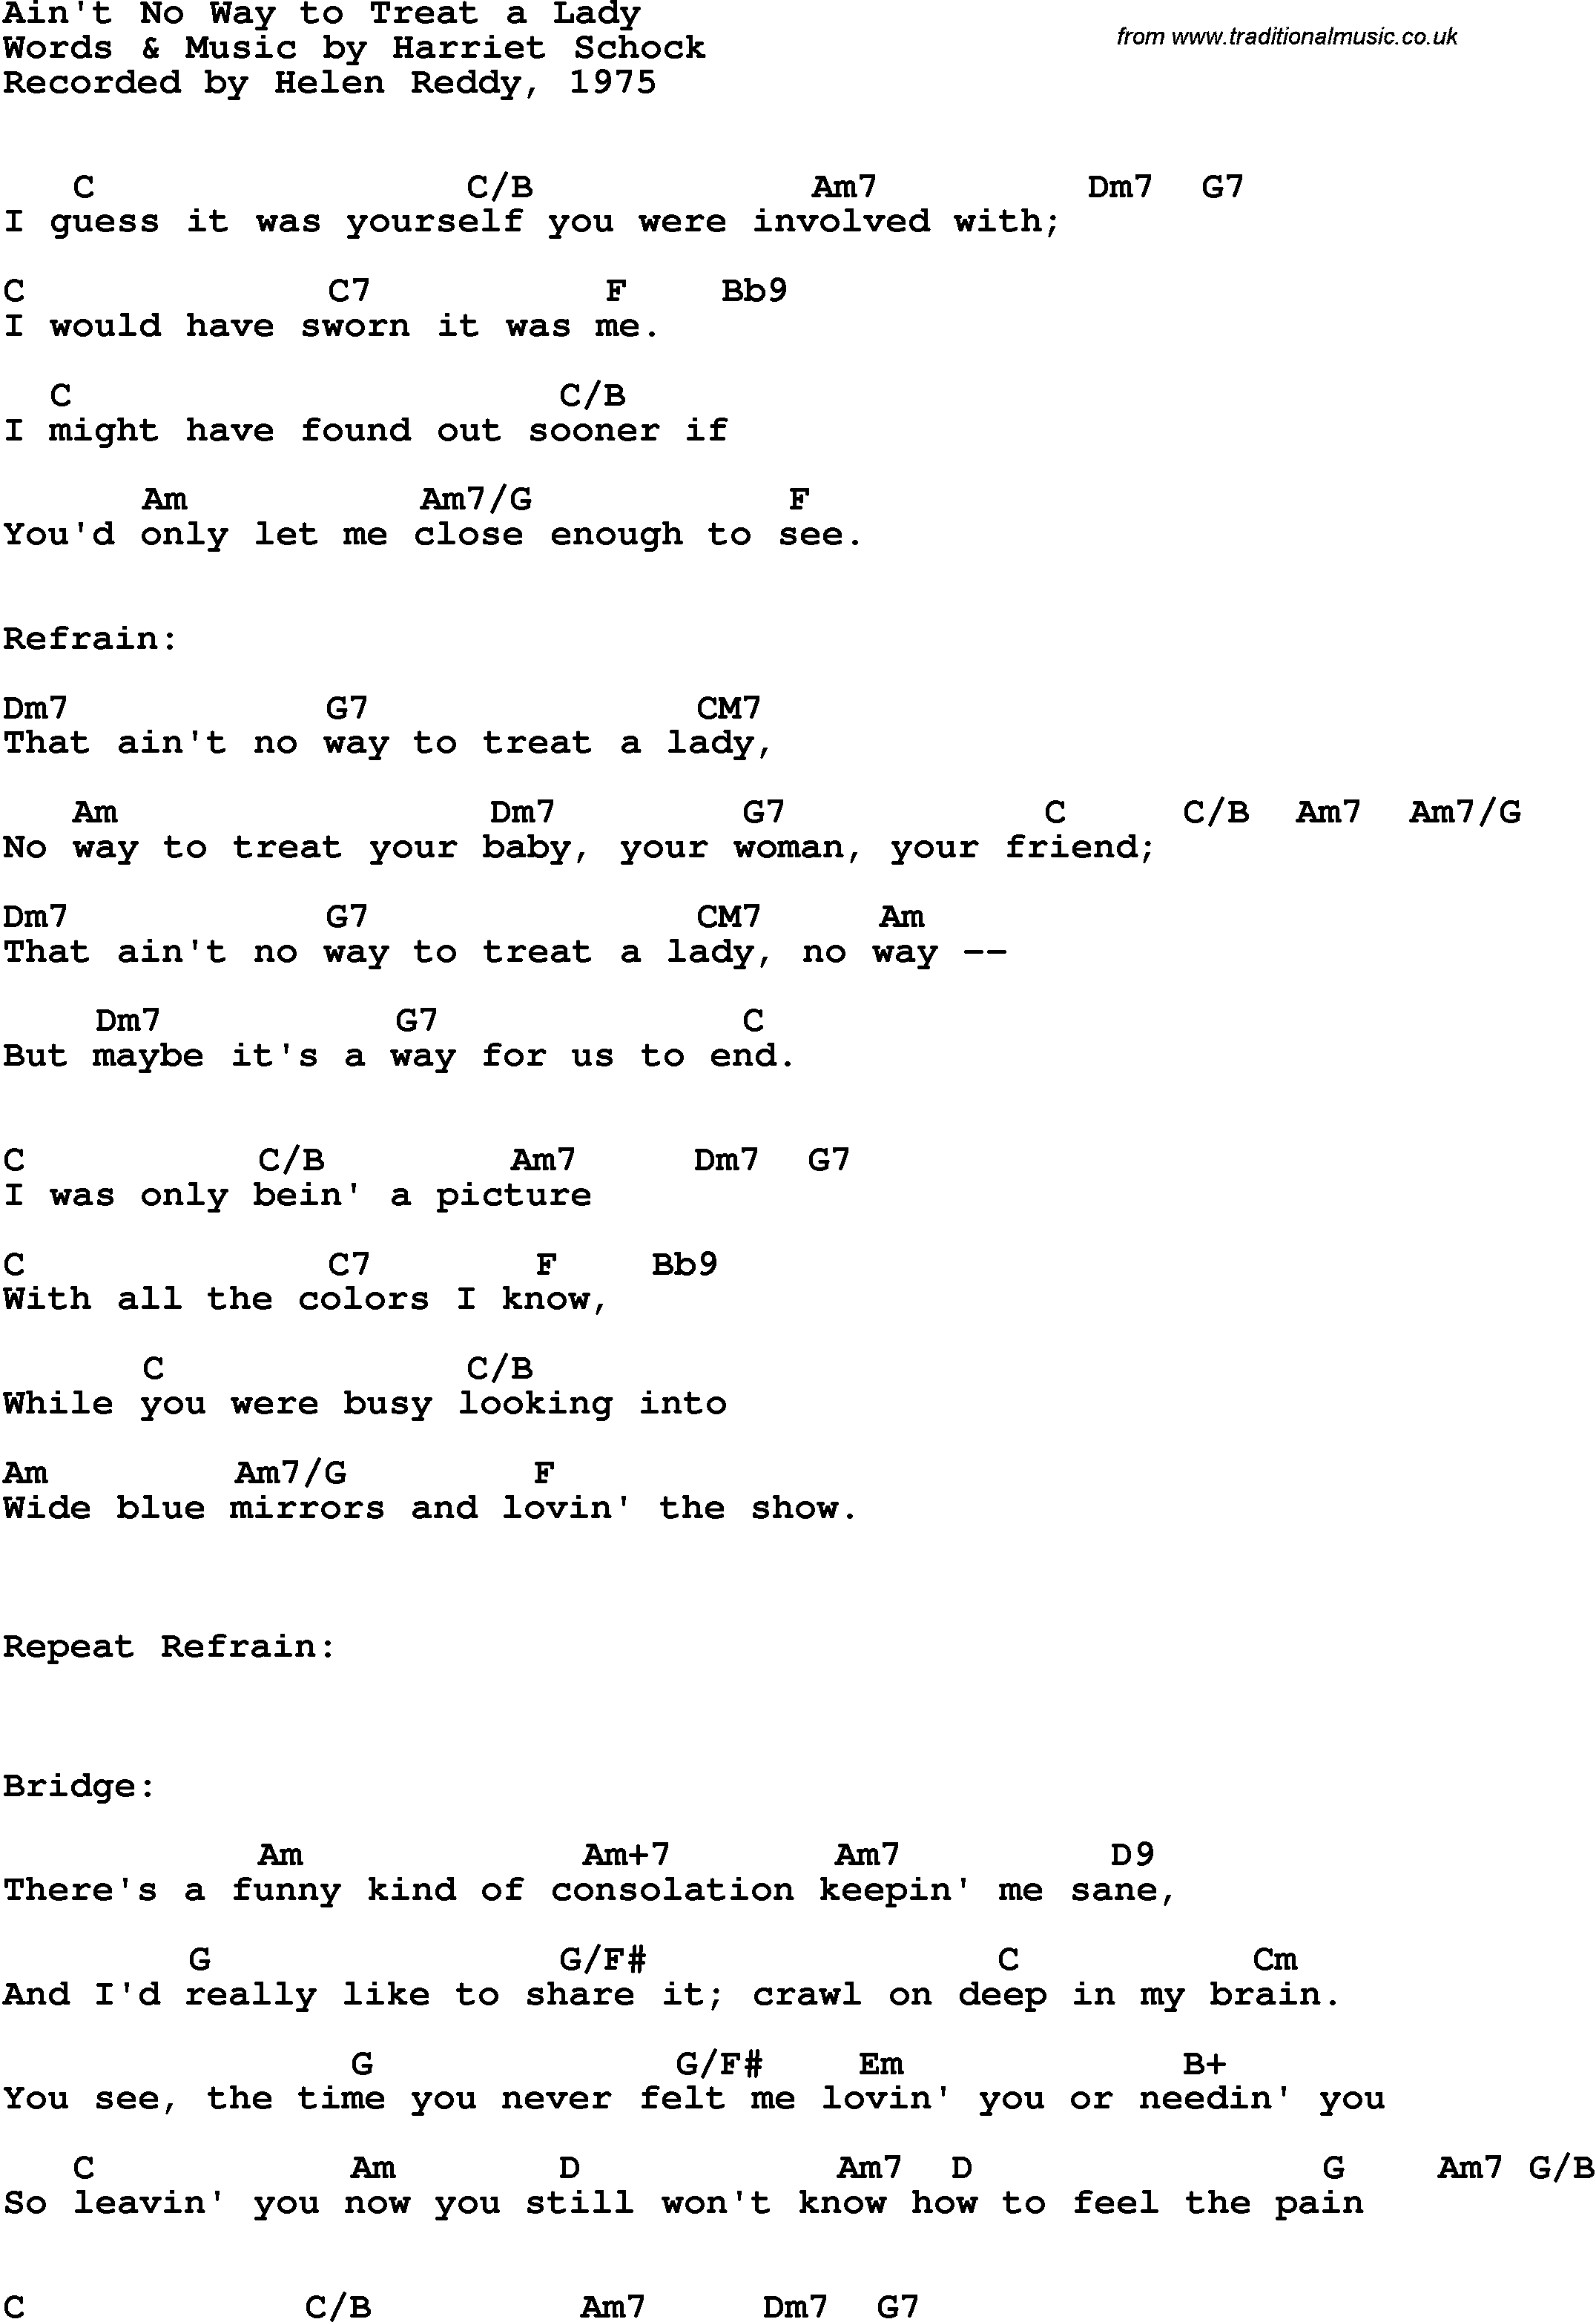 Song Lyrics with guitar chords for Ain't No Way To Treat A Lady - Helen Reddy, 1975